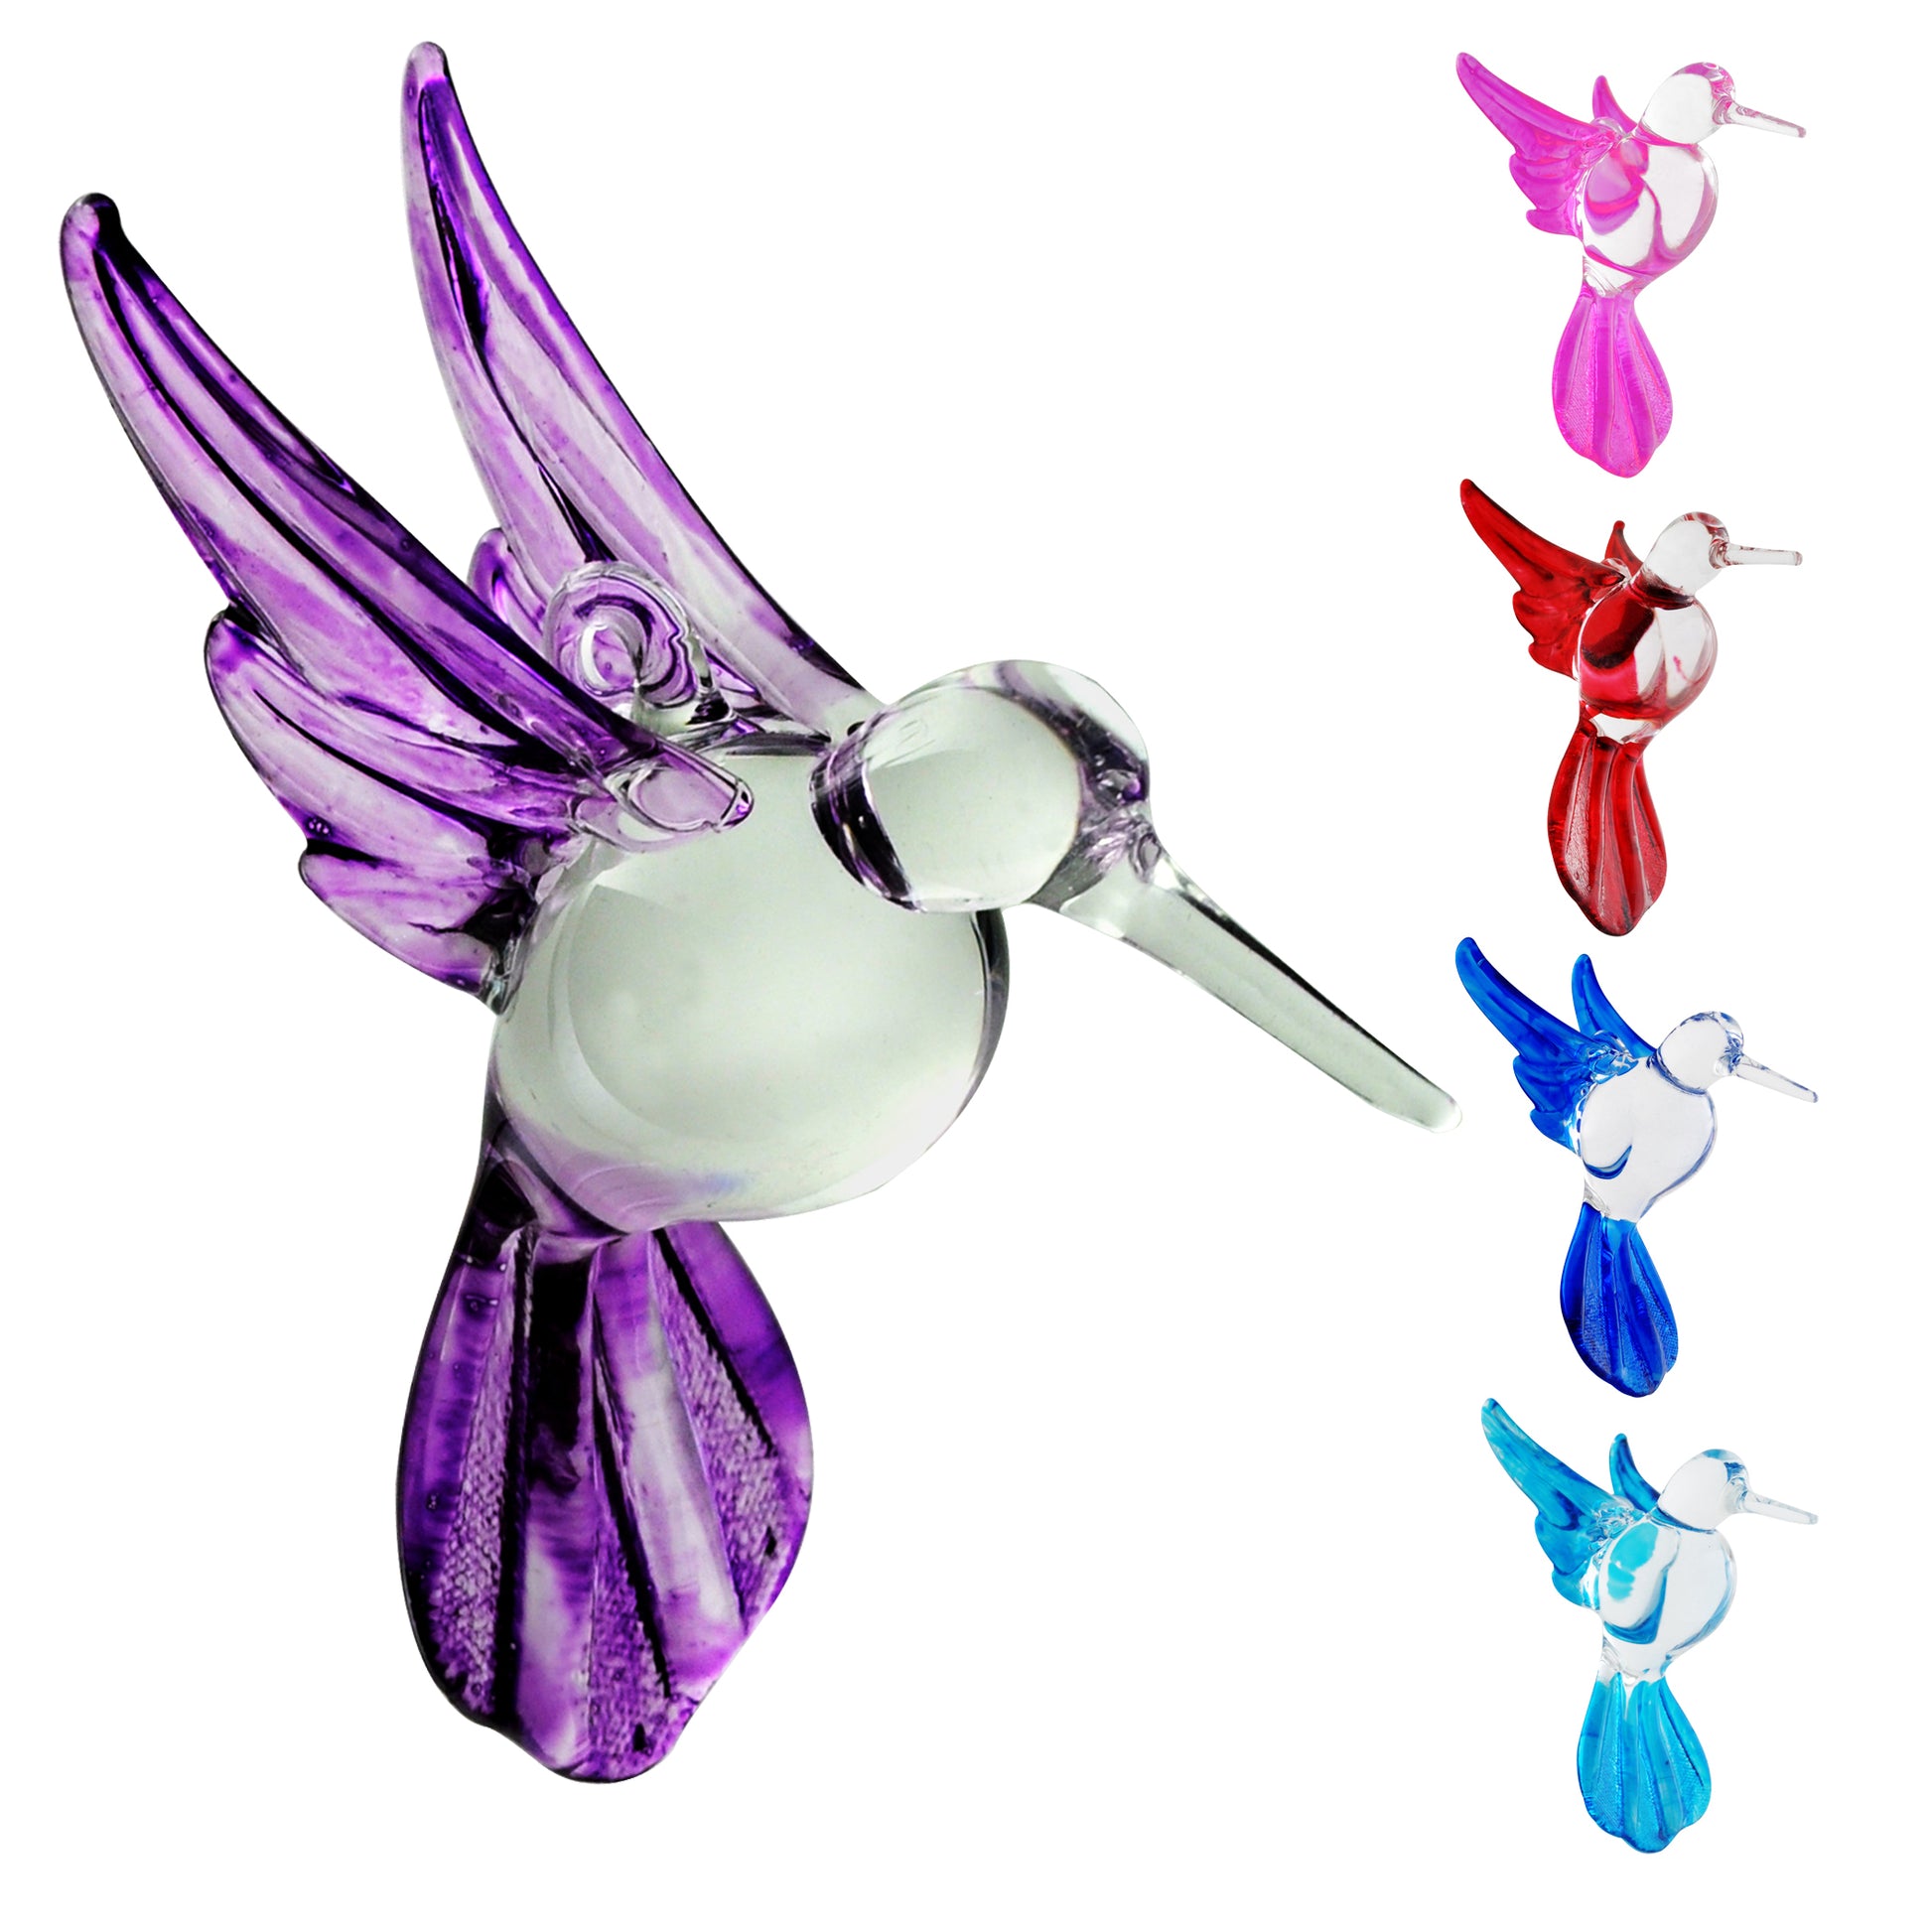 Crystal Castle Solid Colored Hummingbirds in multiple variations.